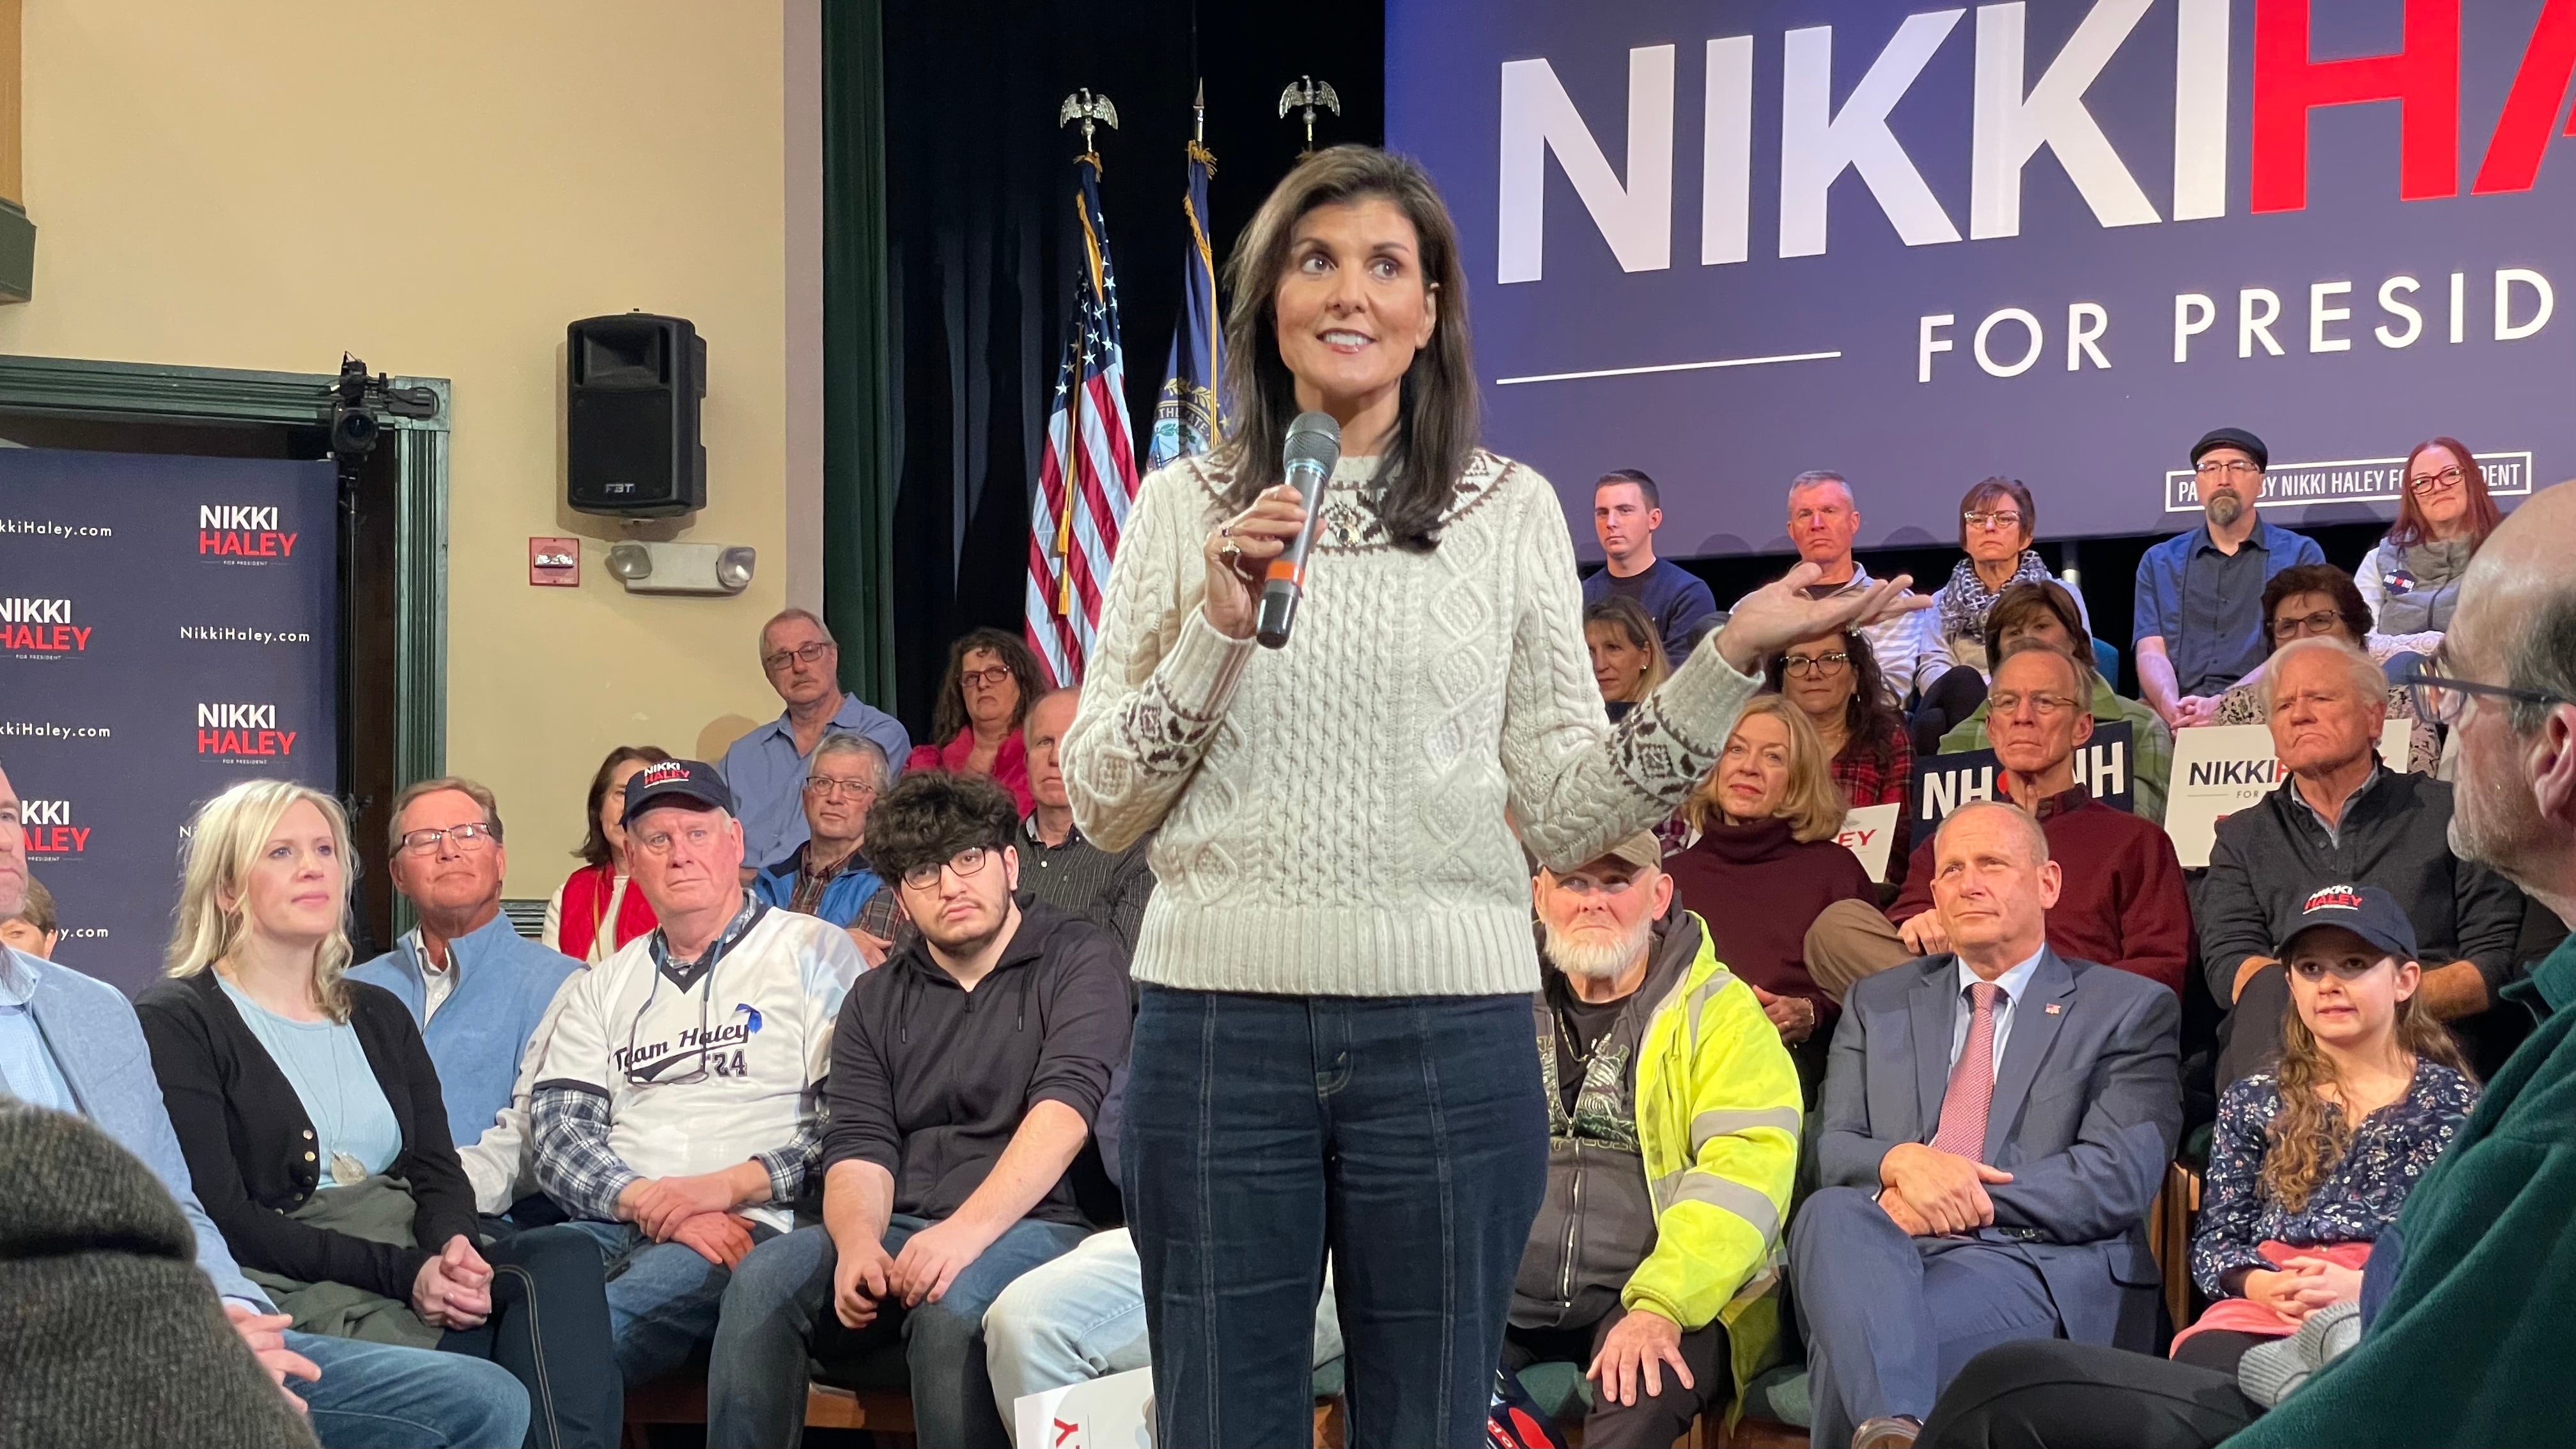 Haley, bolstered by the backing of a major conservative group, is having a moment on the campaign trail